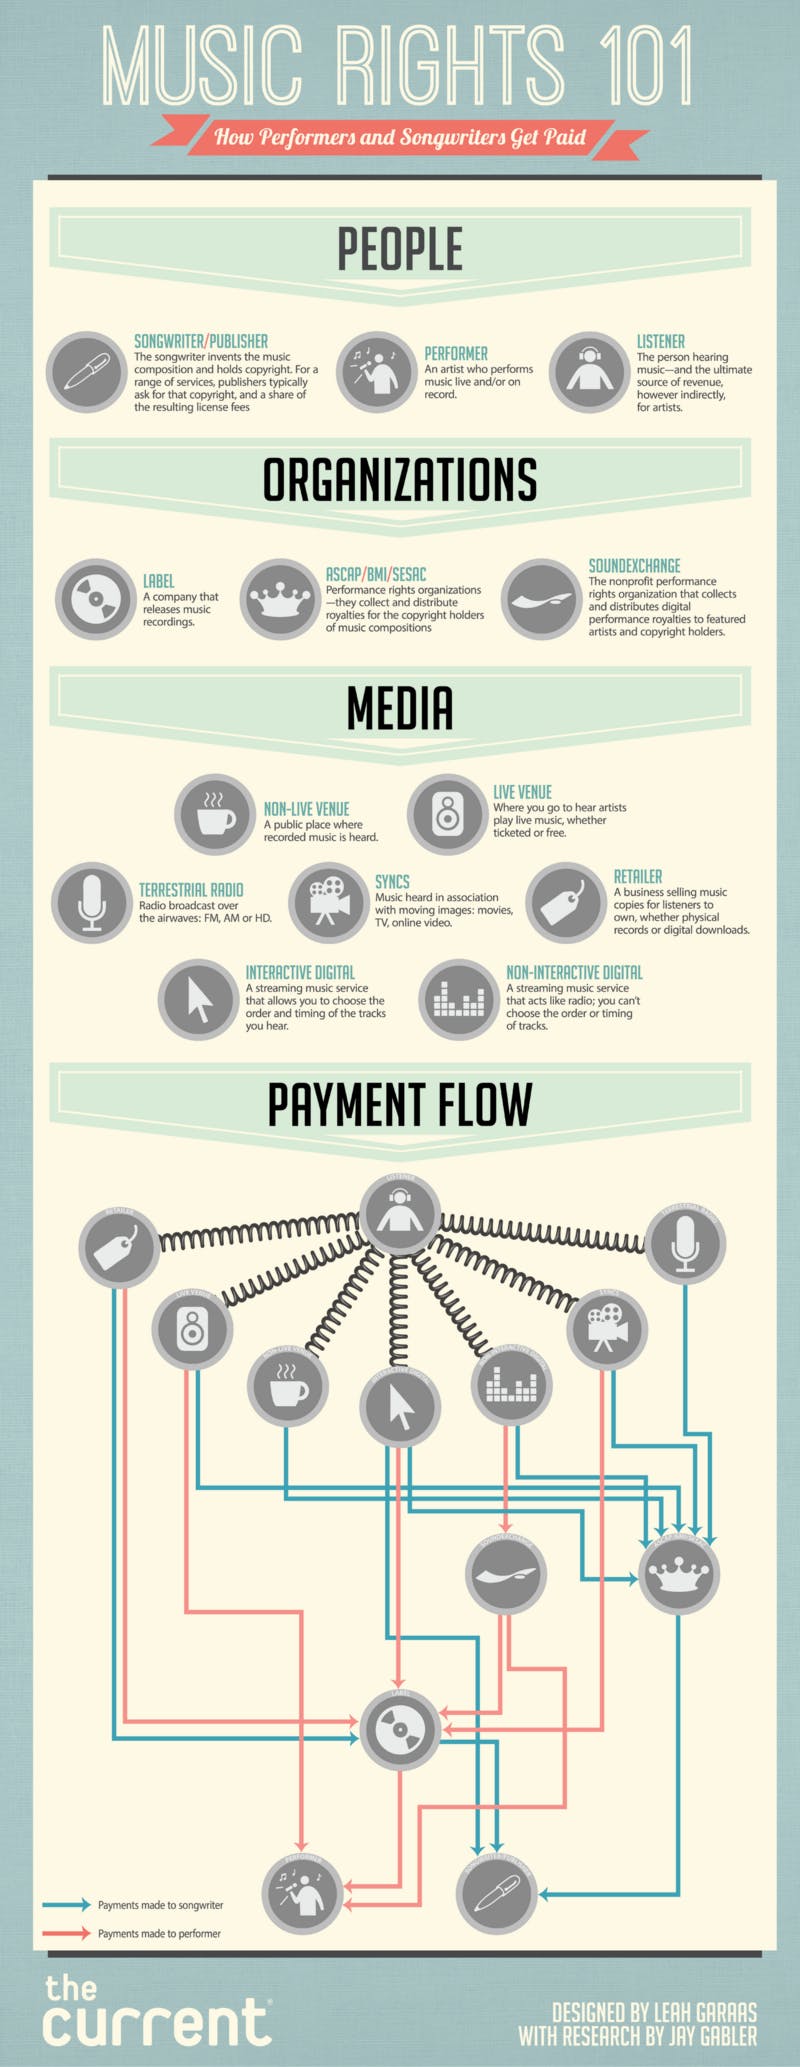 Infographic explaining music rights and avenues where music publishing deals can collect money